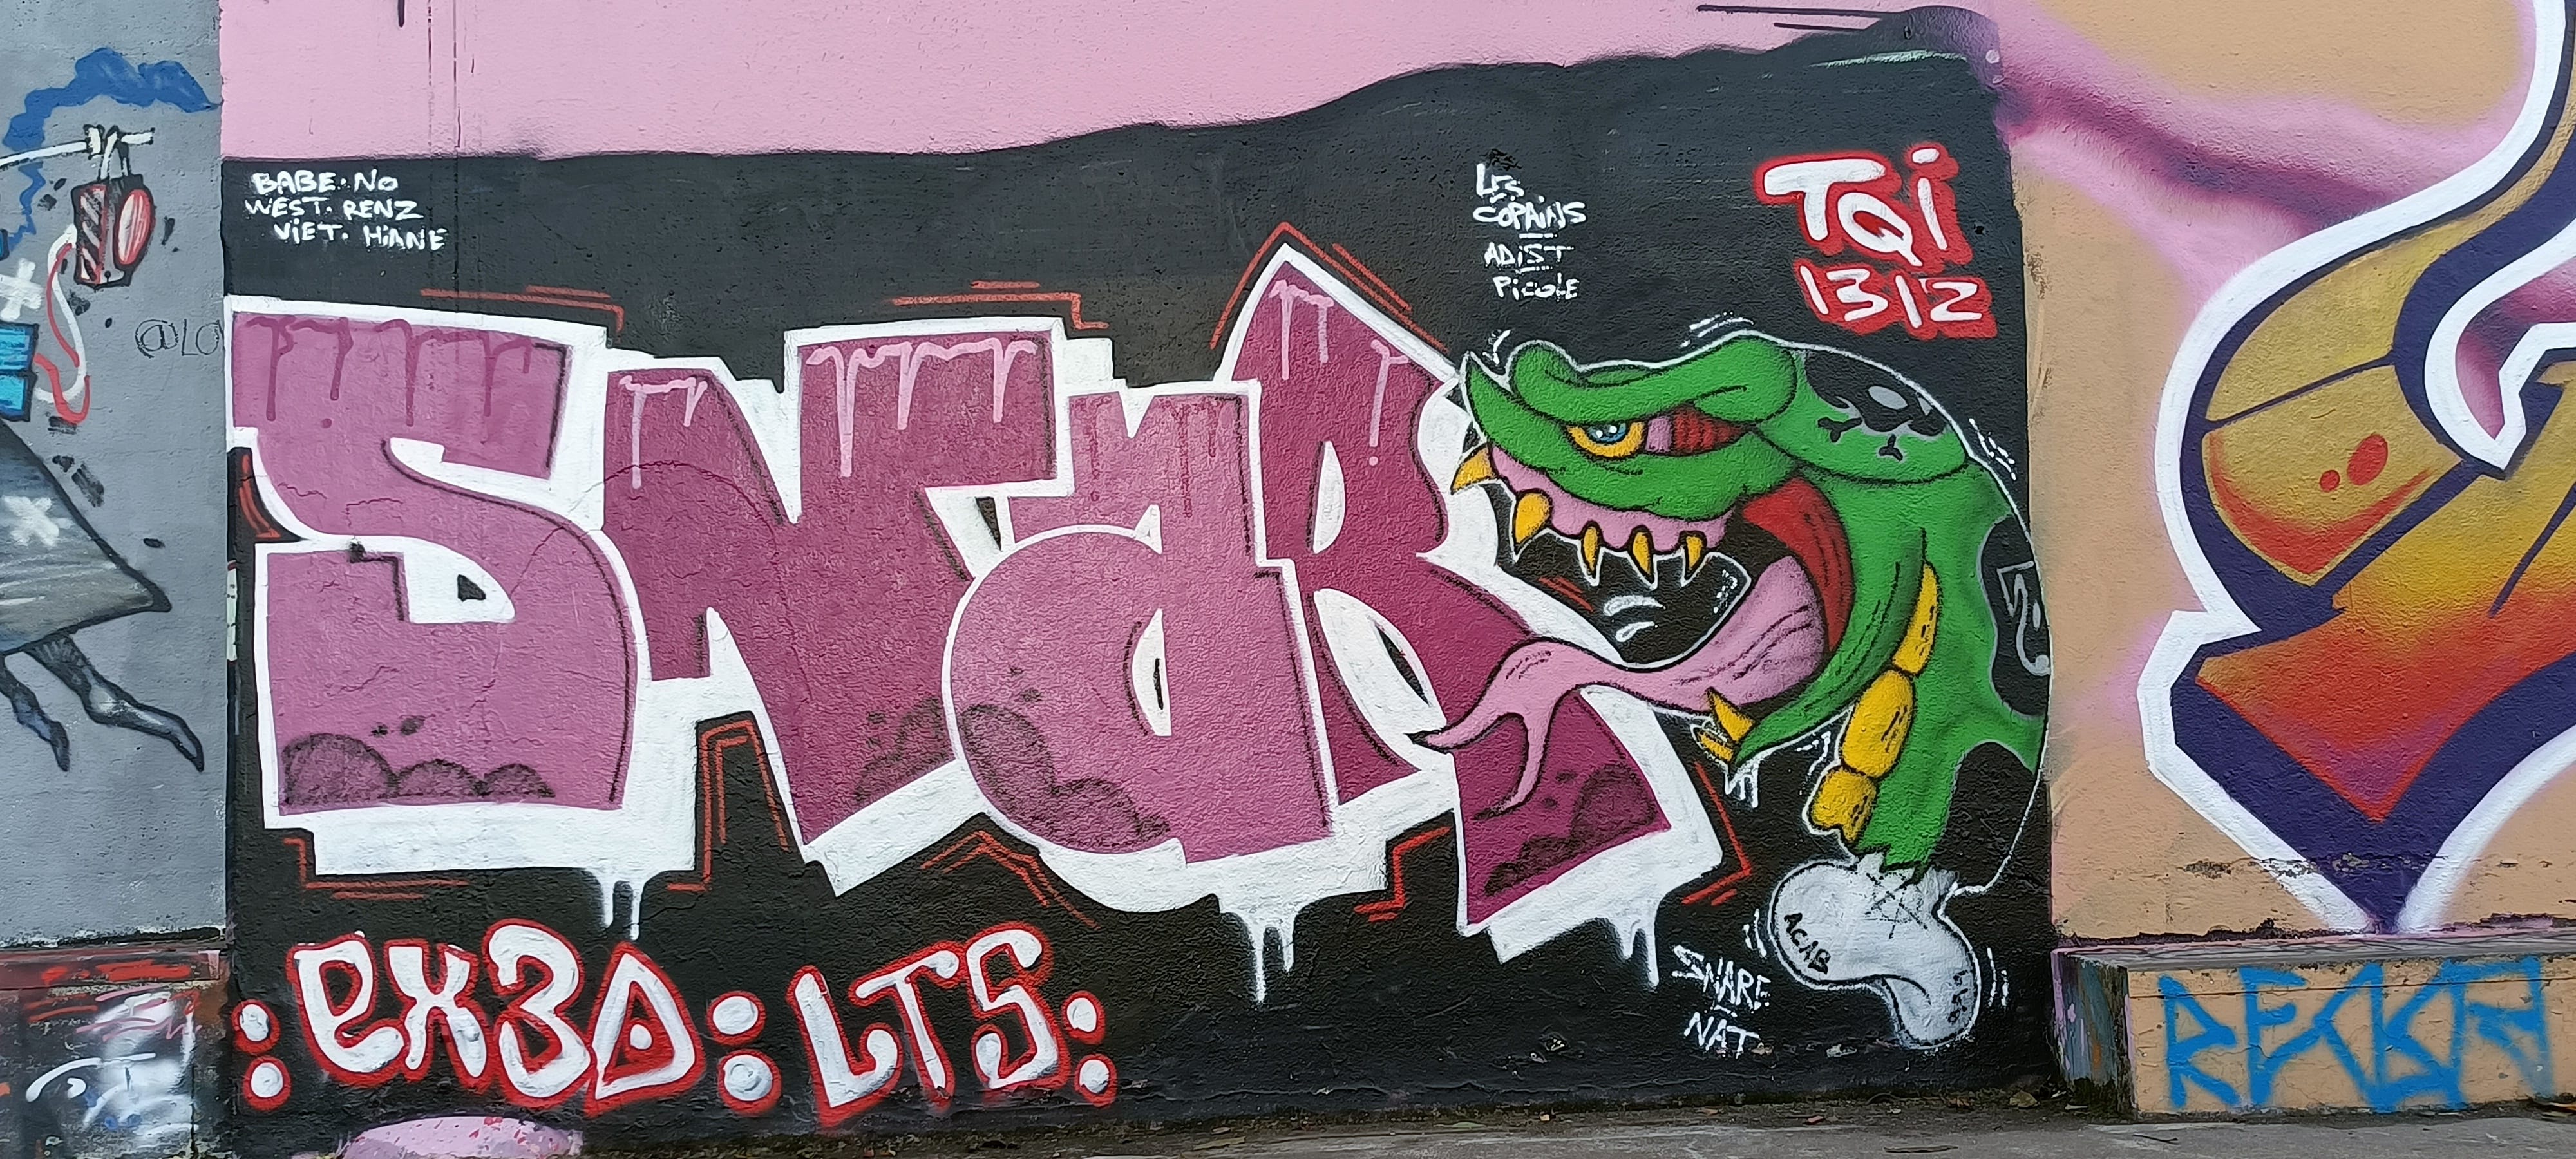 Graffiti 5461  captured by Rabot in Nantes France